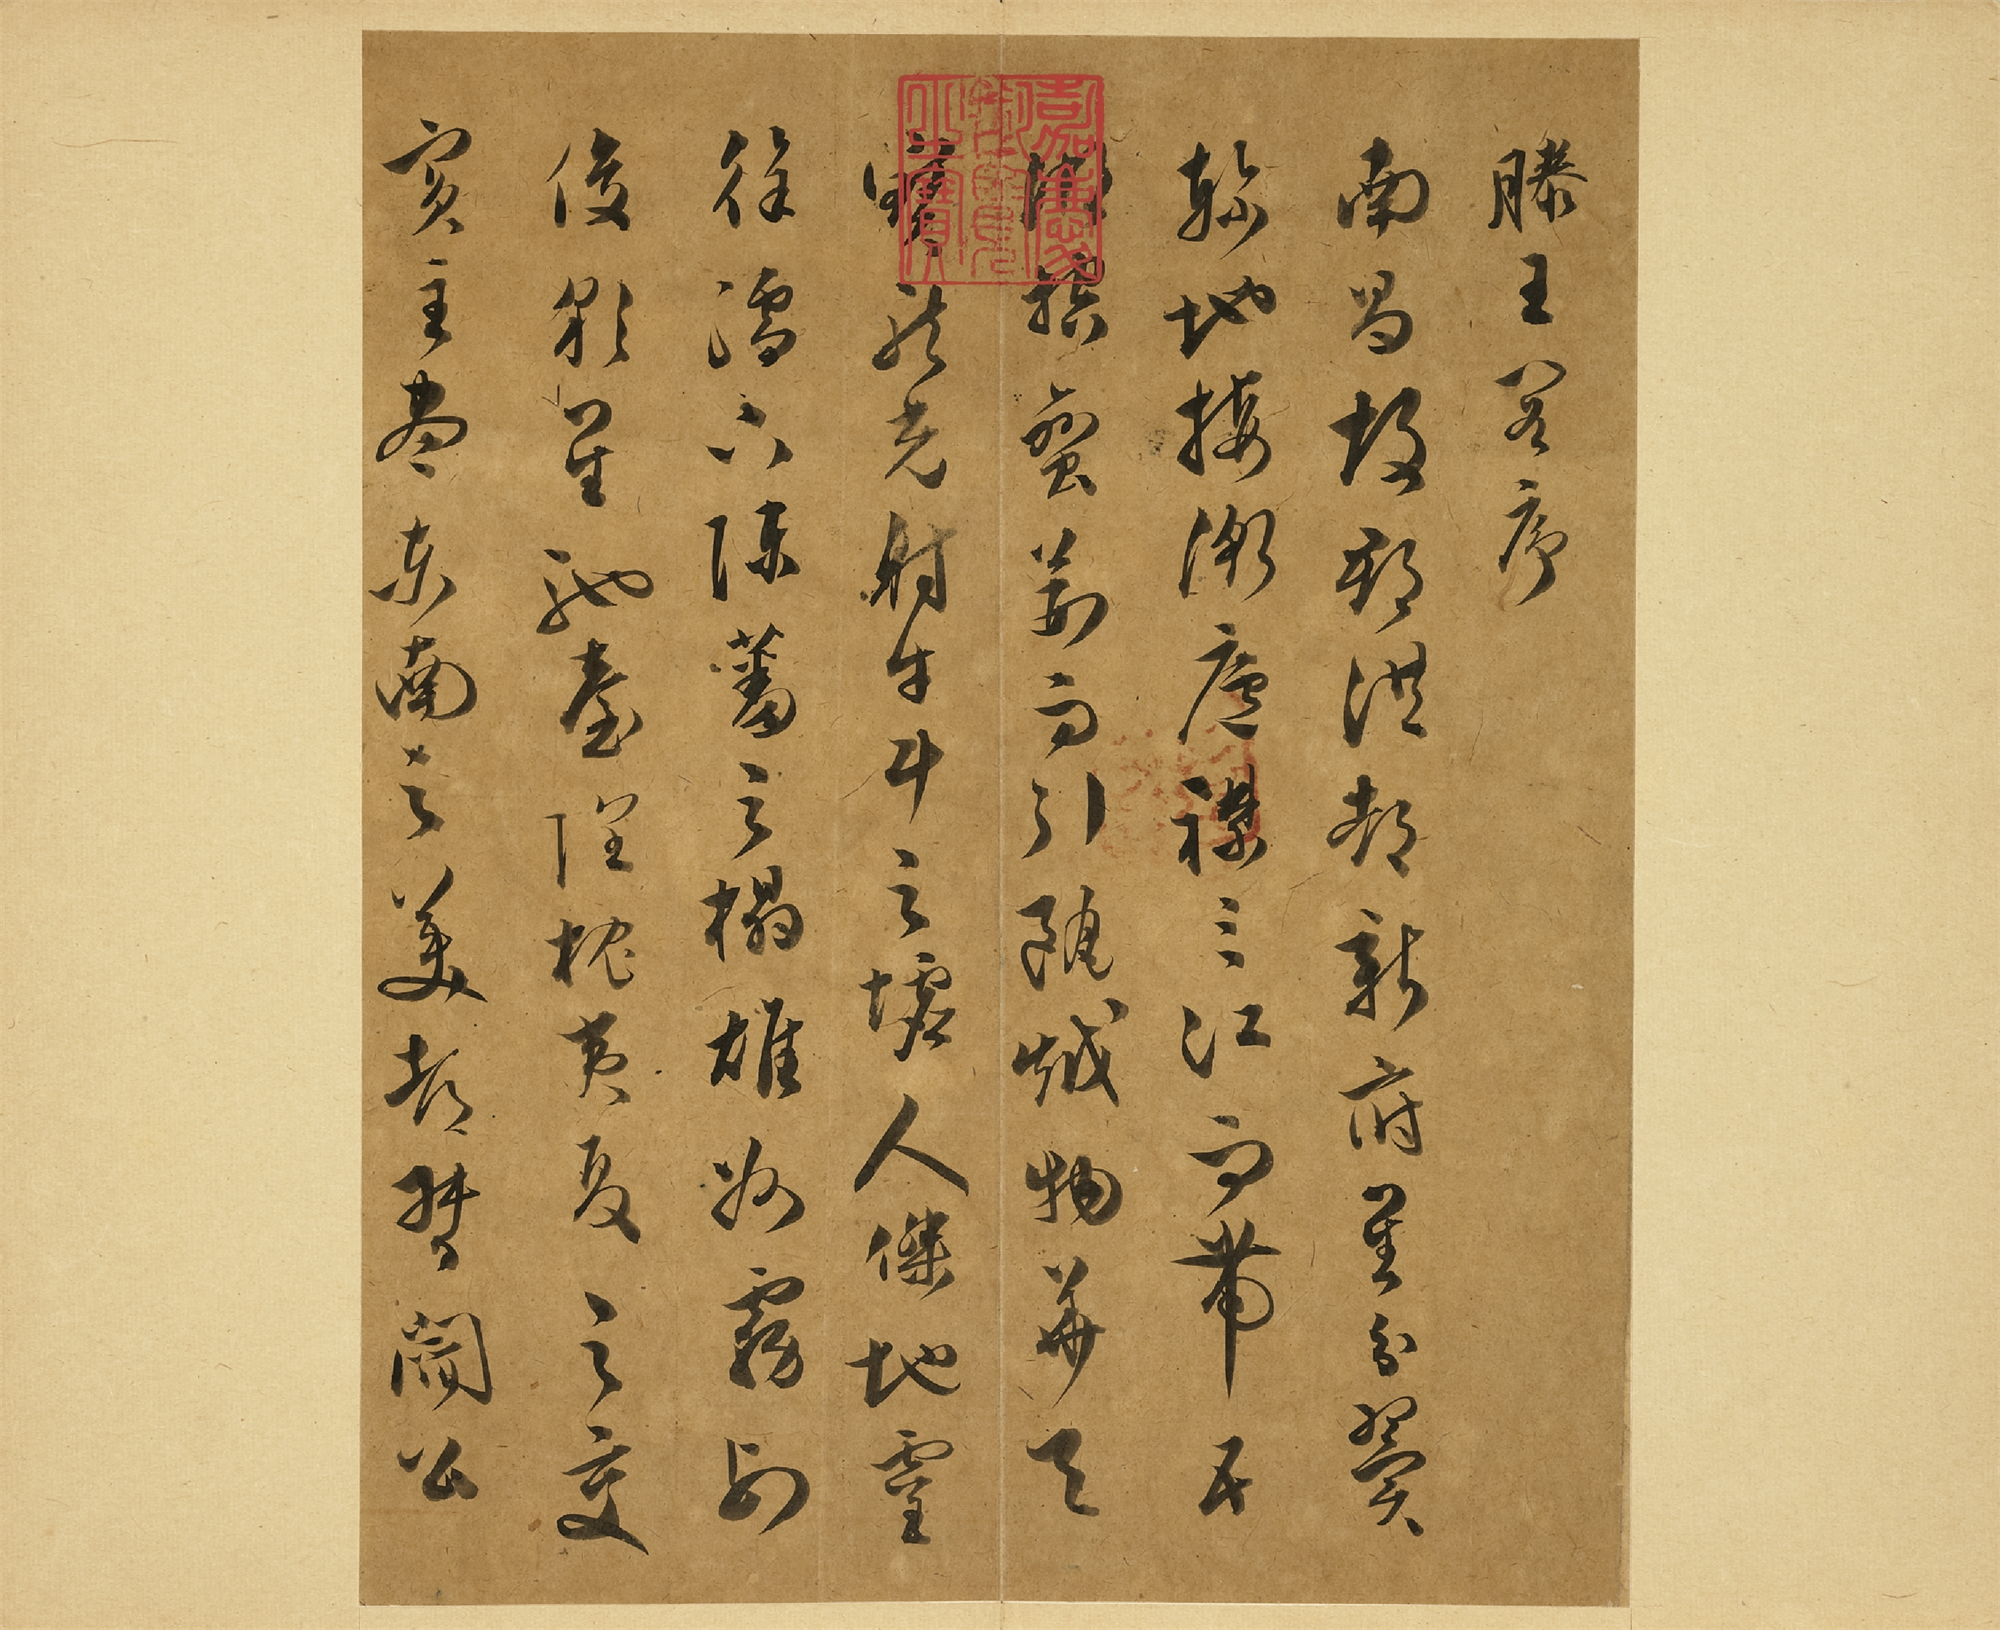 ‘Preface to the Prince Teng Pavilion’ by Wang Bo of the Tang Dynasty in Cursive Script Wen Peng, Mipreview